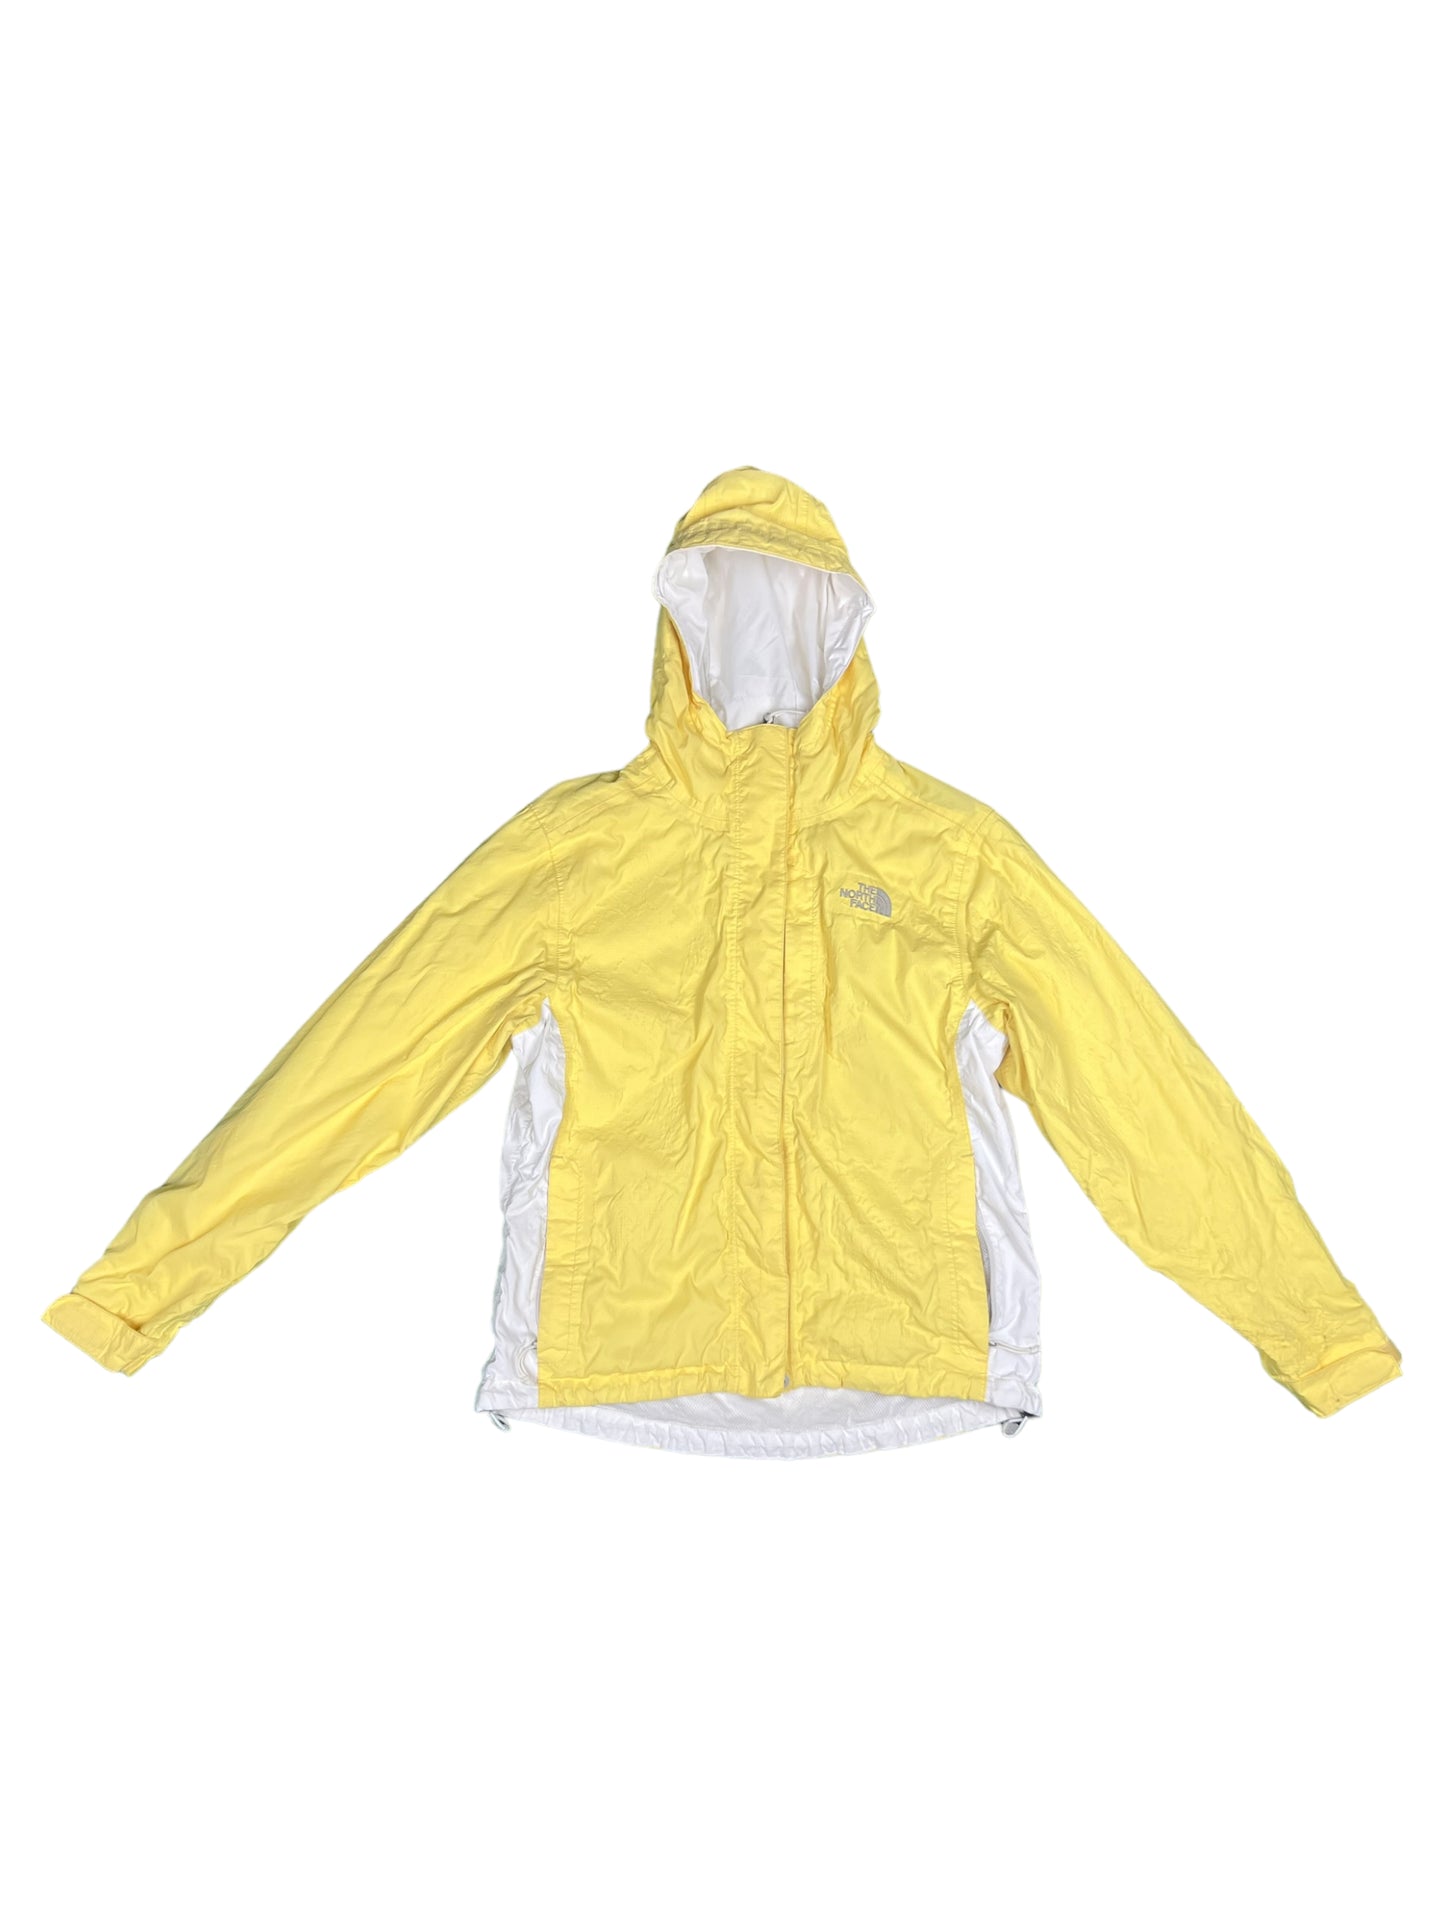 The North Face Venture Women’s Jacket